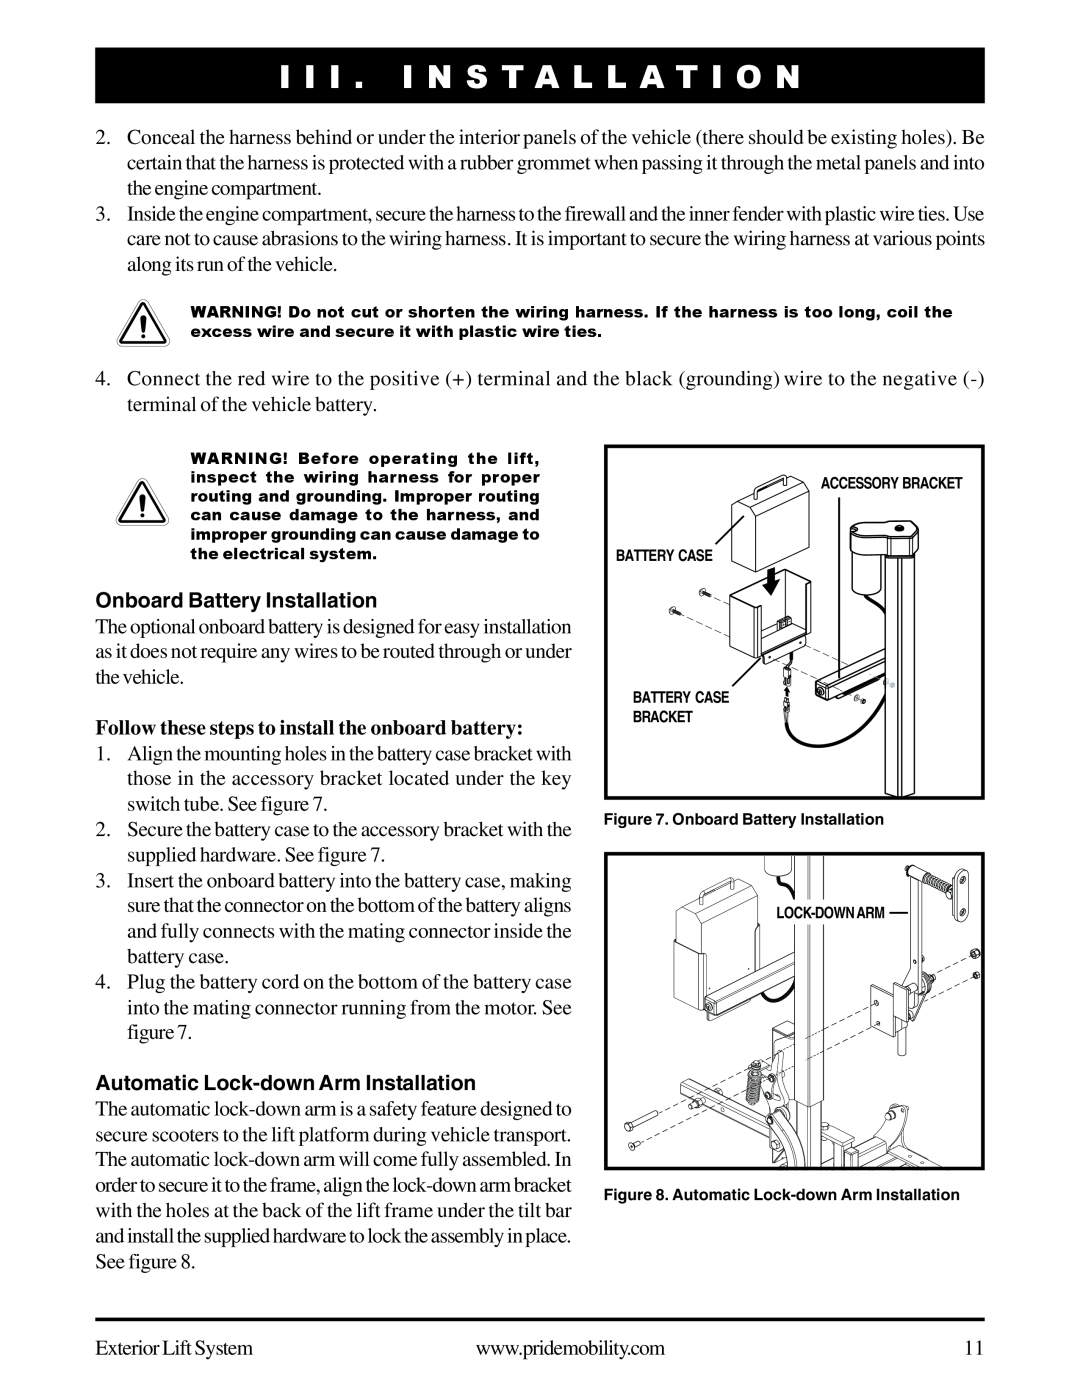 Pride Mobility Exterior Lift System manual Onboard Battery Installation, Follow these steps to install the onboard battery 